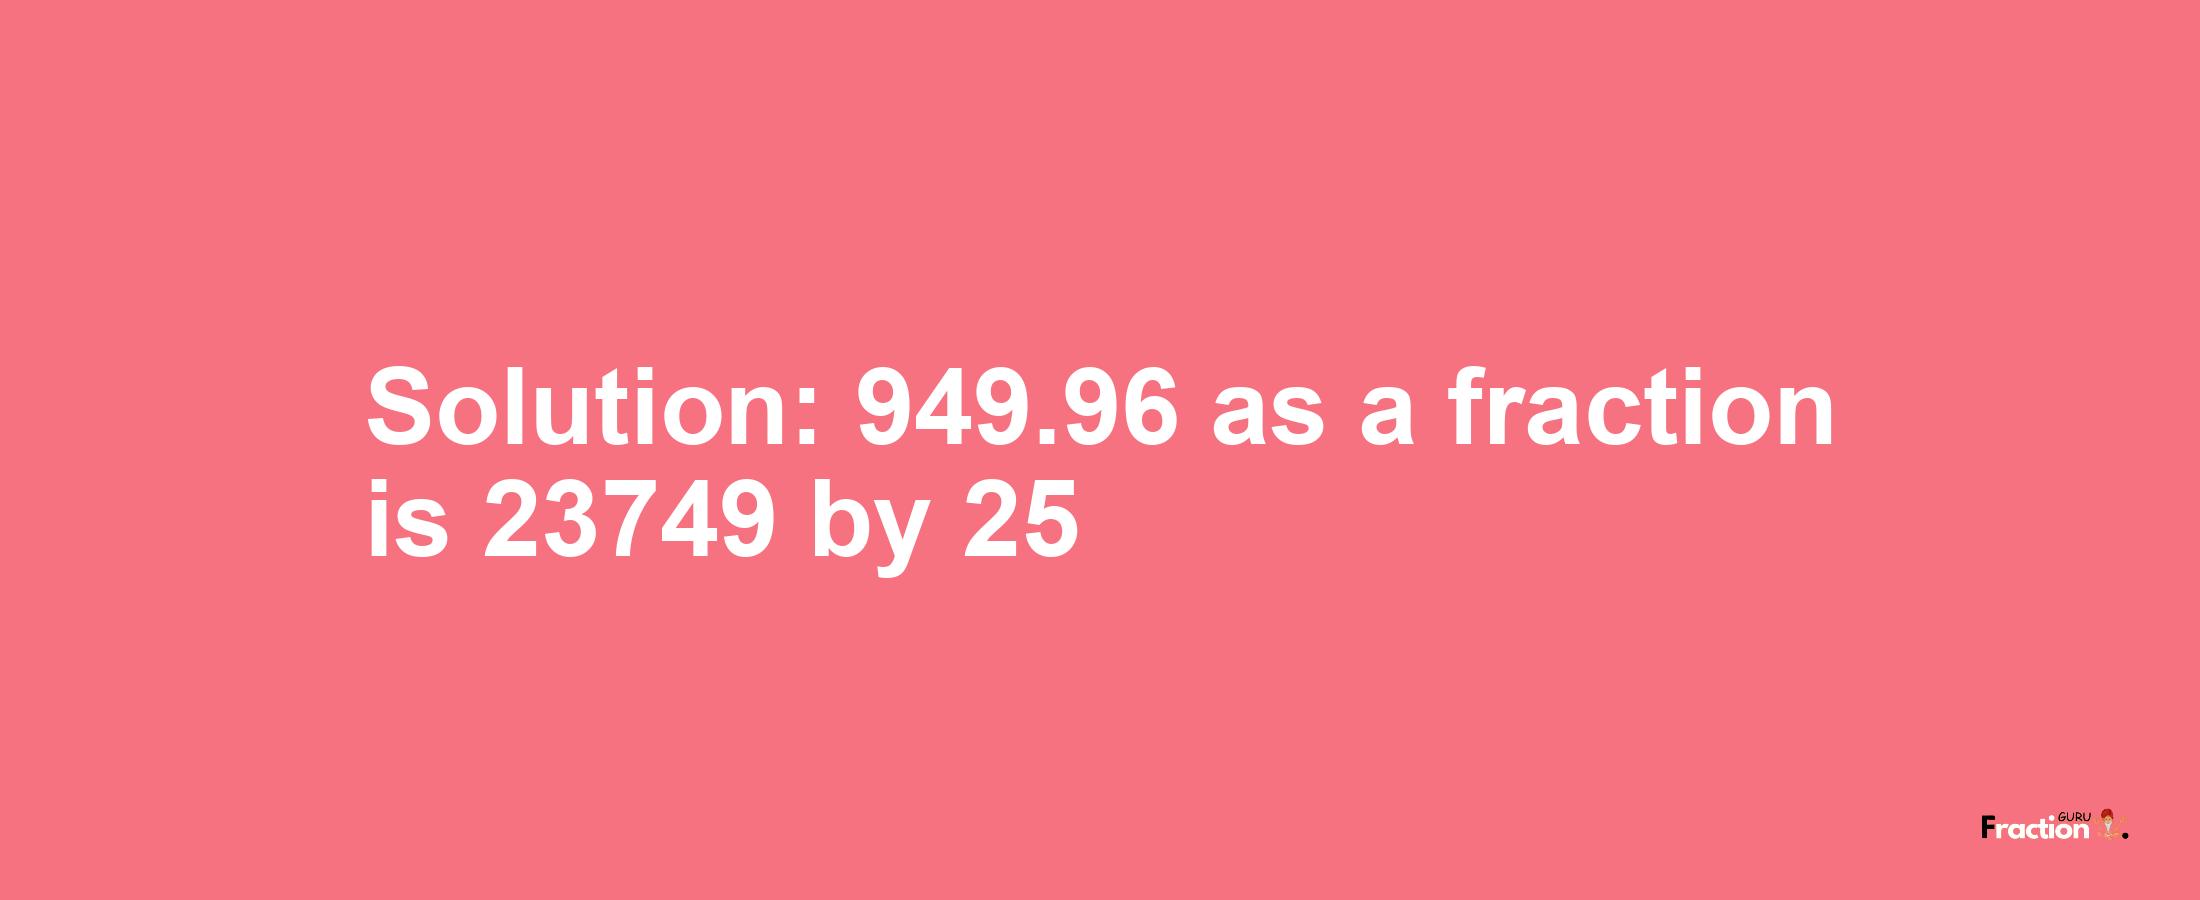 Solution:949.96 as a fraction is 23749/25